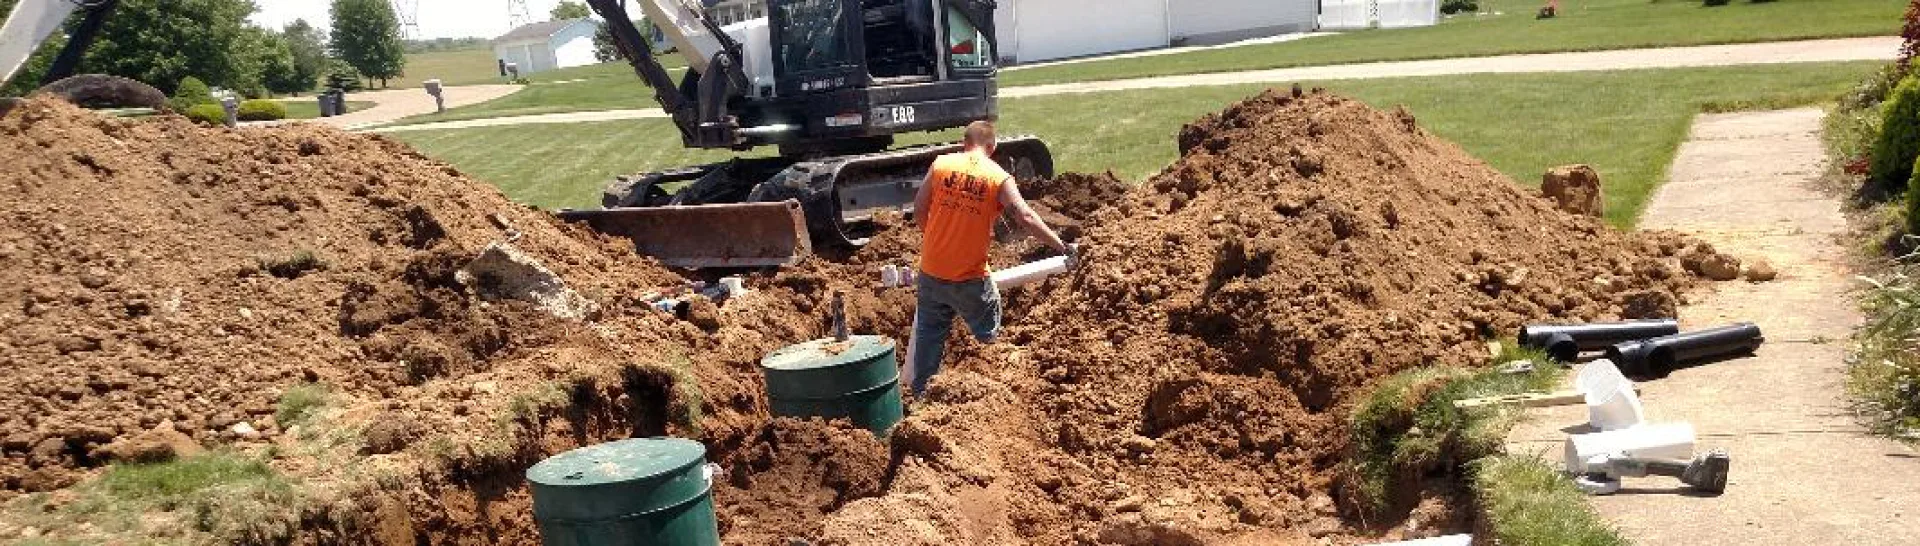 septic tanks in ground during installation